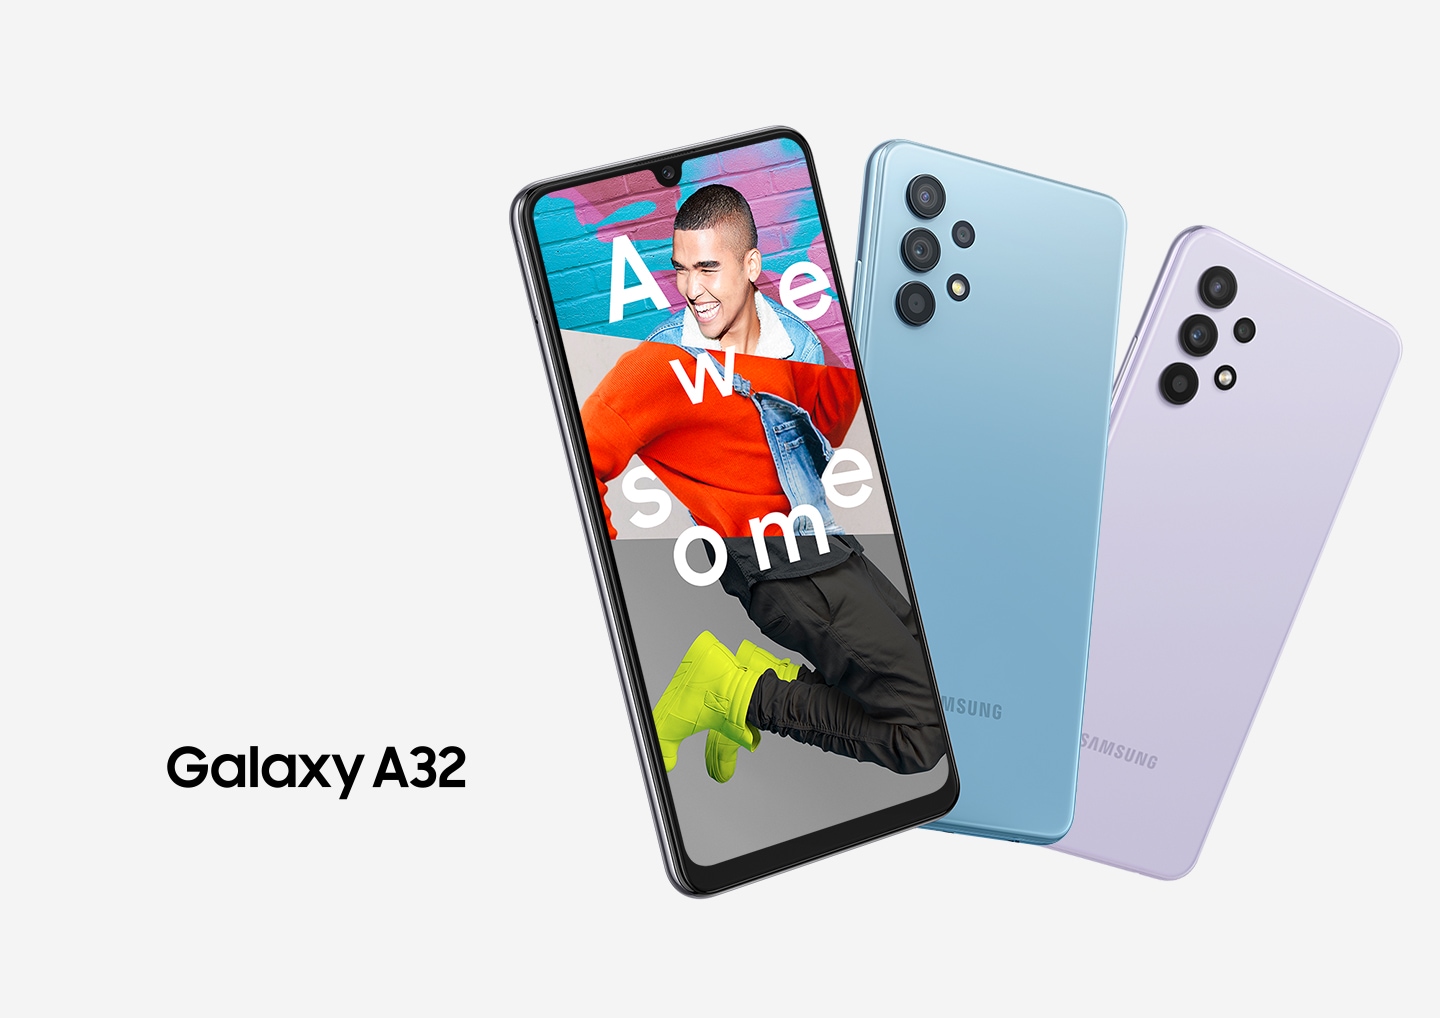 Galaxy A32 Key visual comes out in three devices with its official logo on the side. On the screen, an excited young man hop on where he is standing, surrounding the text of `Awesome` on him.